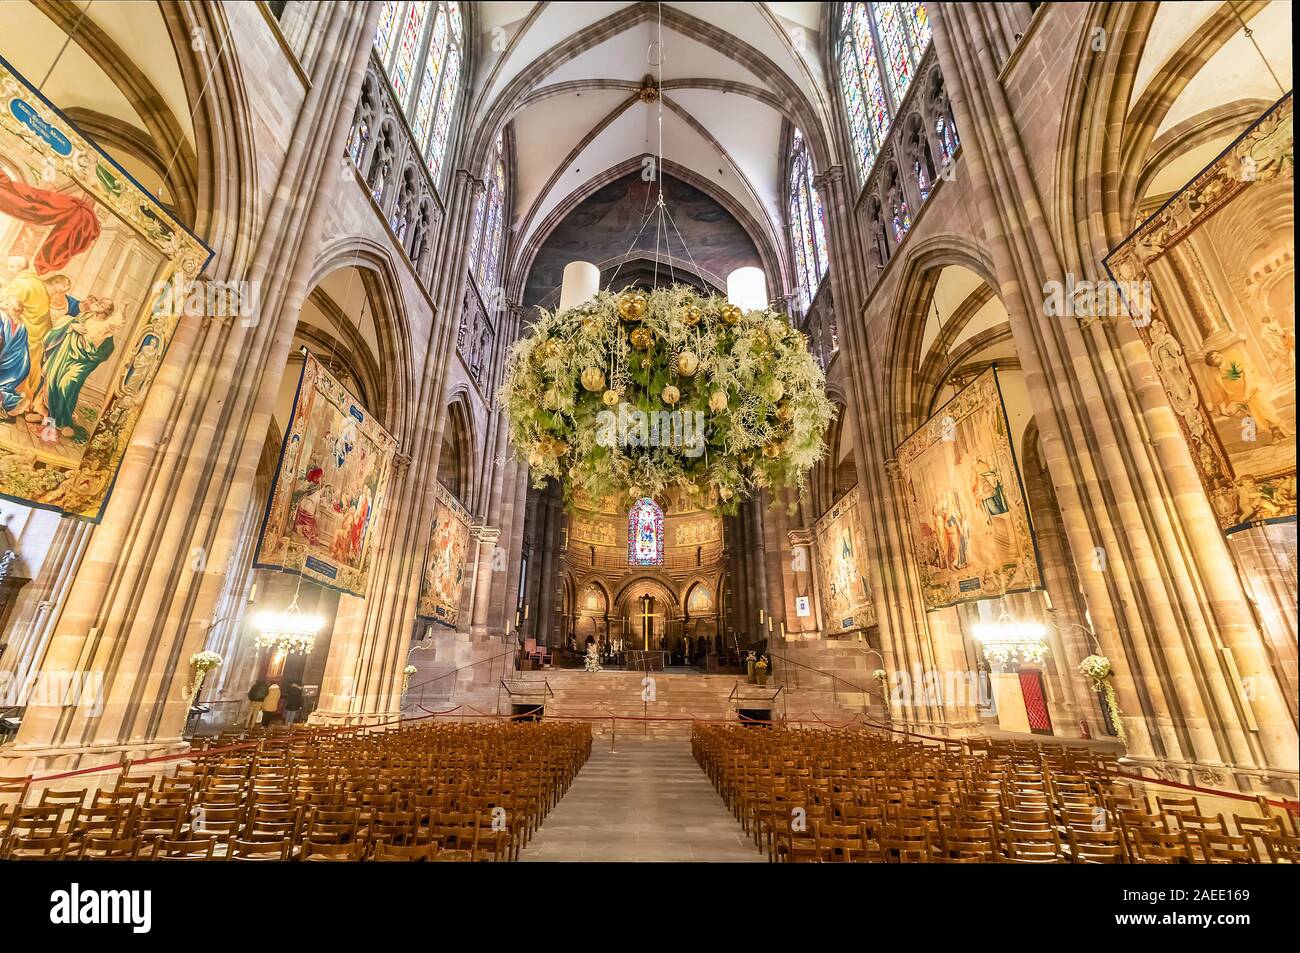 Strasbourg, France - december 1,2019: Interior of Strasbourg Cathedral or the Cathedral of Our Lady of Strasbourg, also known as Strasbourg Minster, C Stock Photo